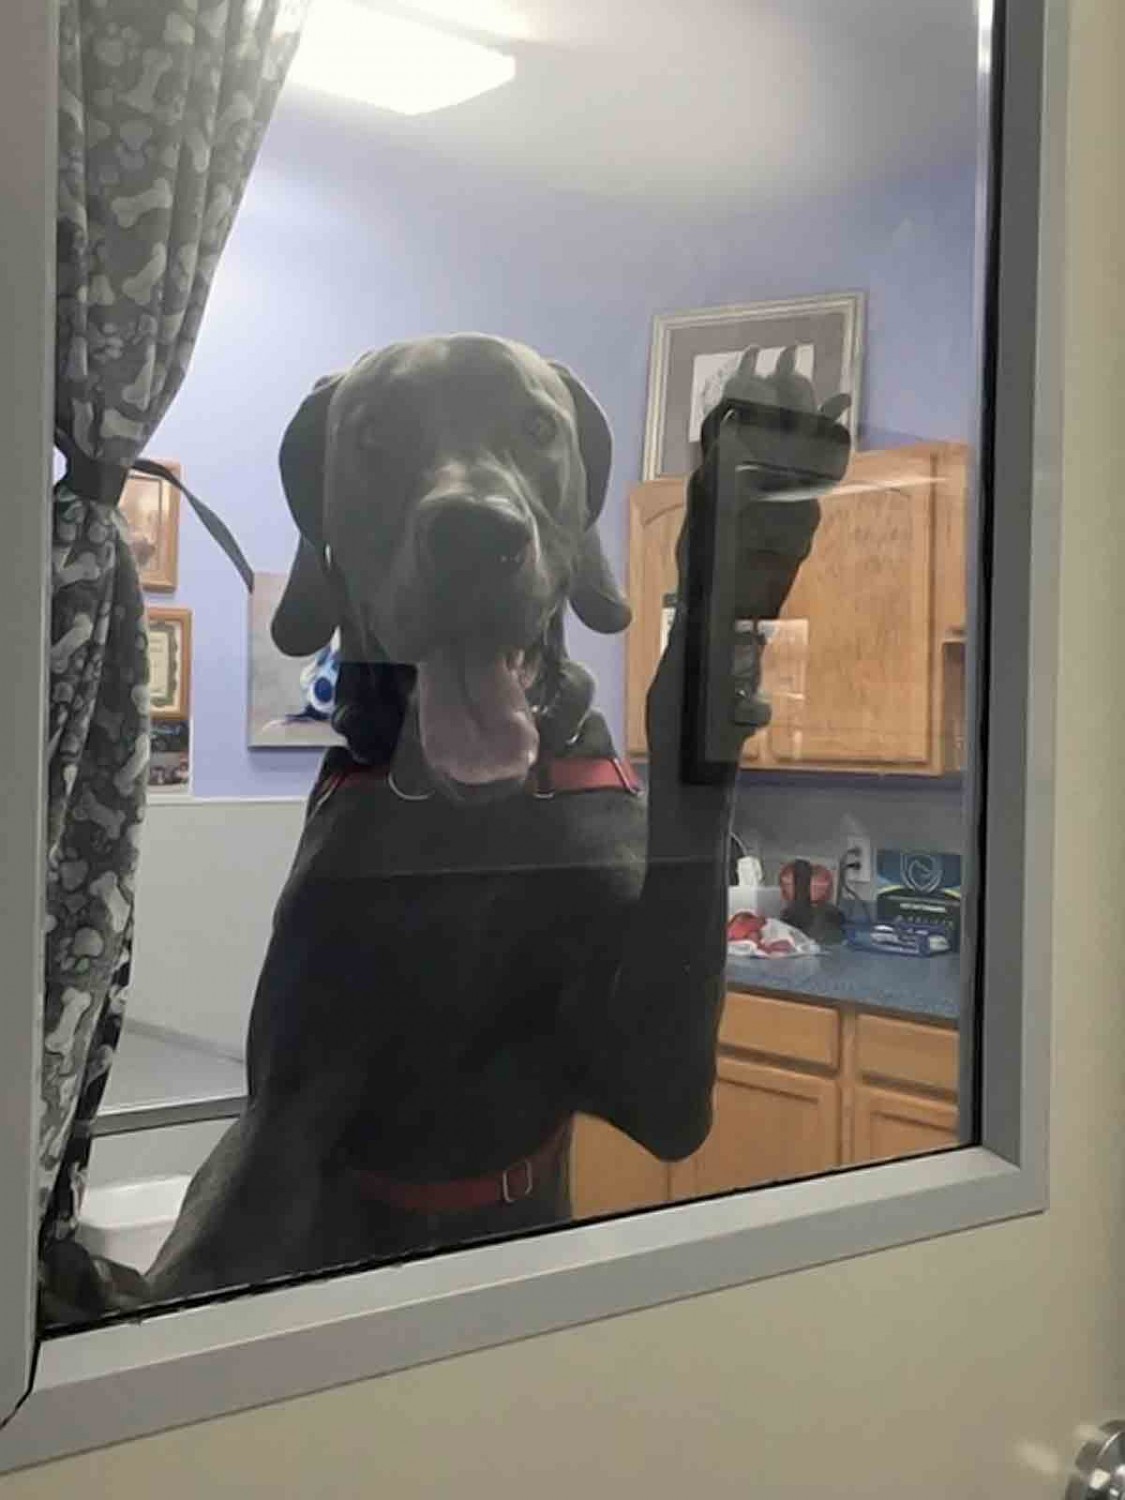 Dog at the window